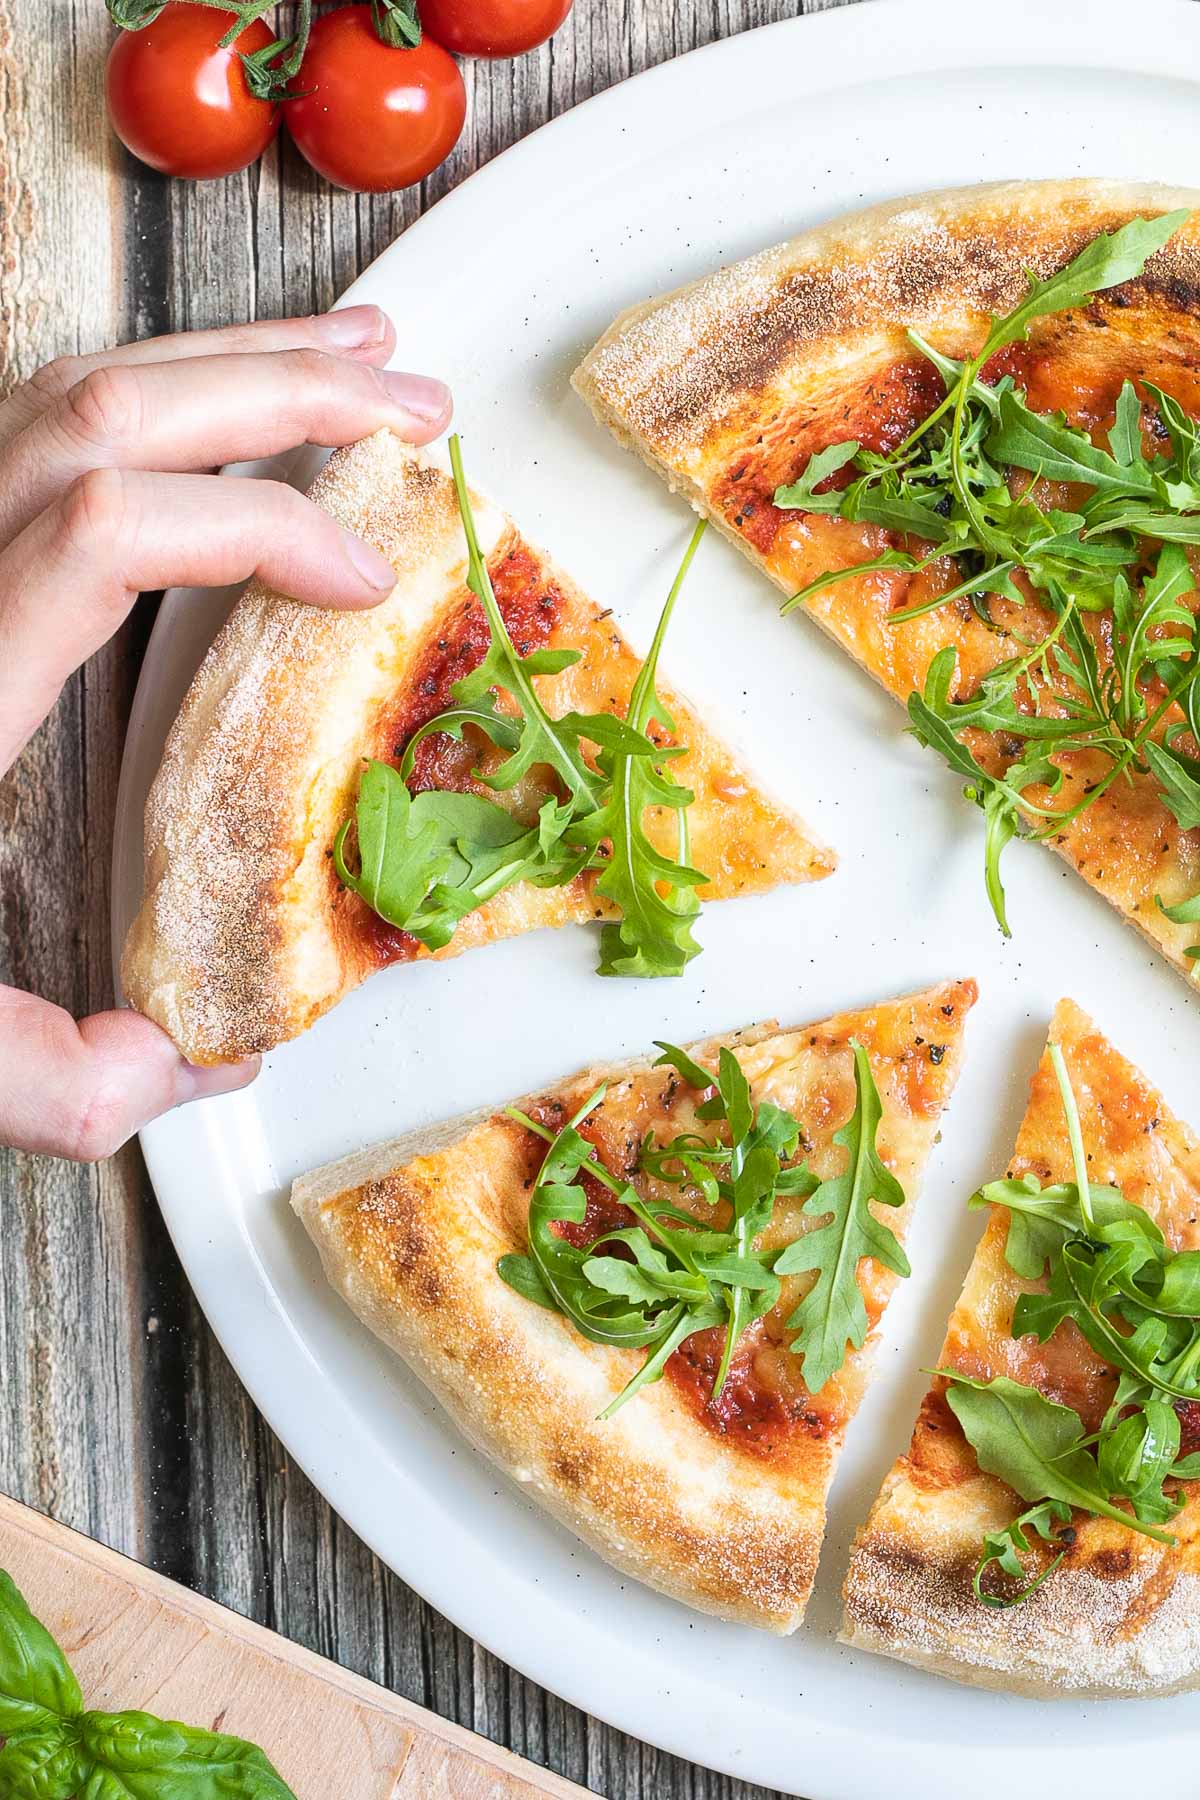 A pizza cut into slices with fluffy crispy crust topped with tomato sauce, melted cheese and fresh arugula on a white plate. A hand is taking one slice.